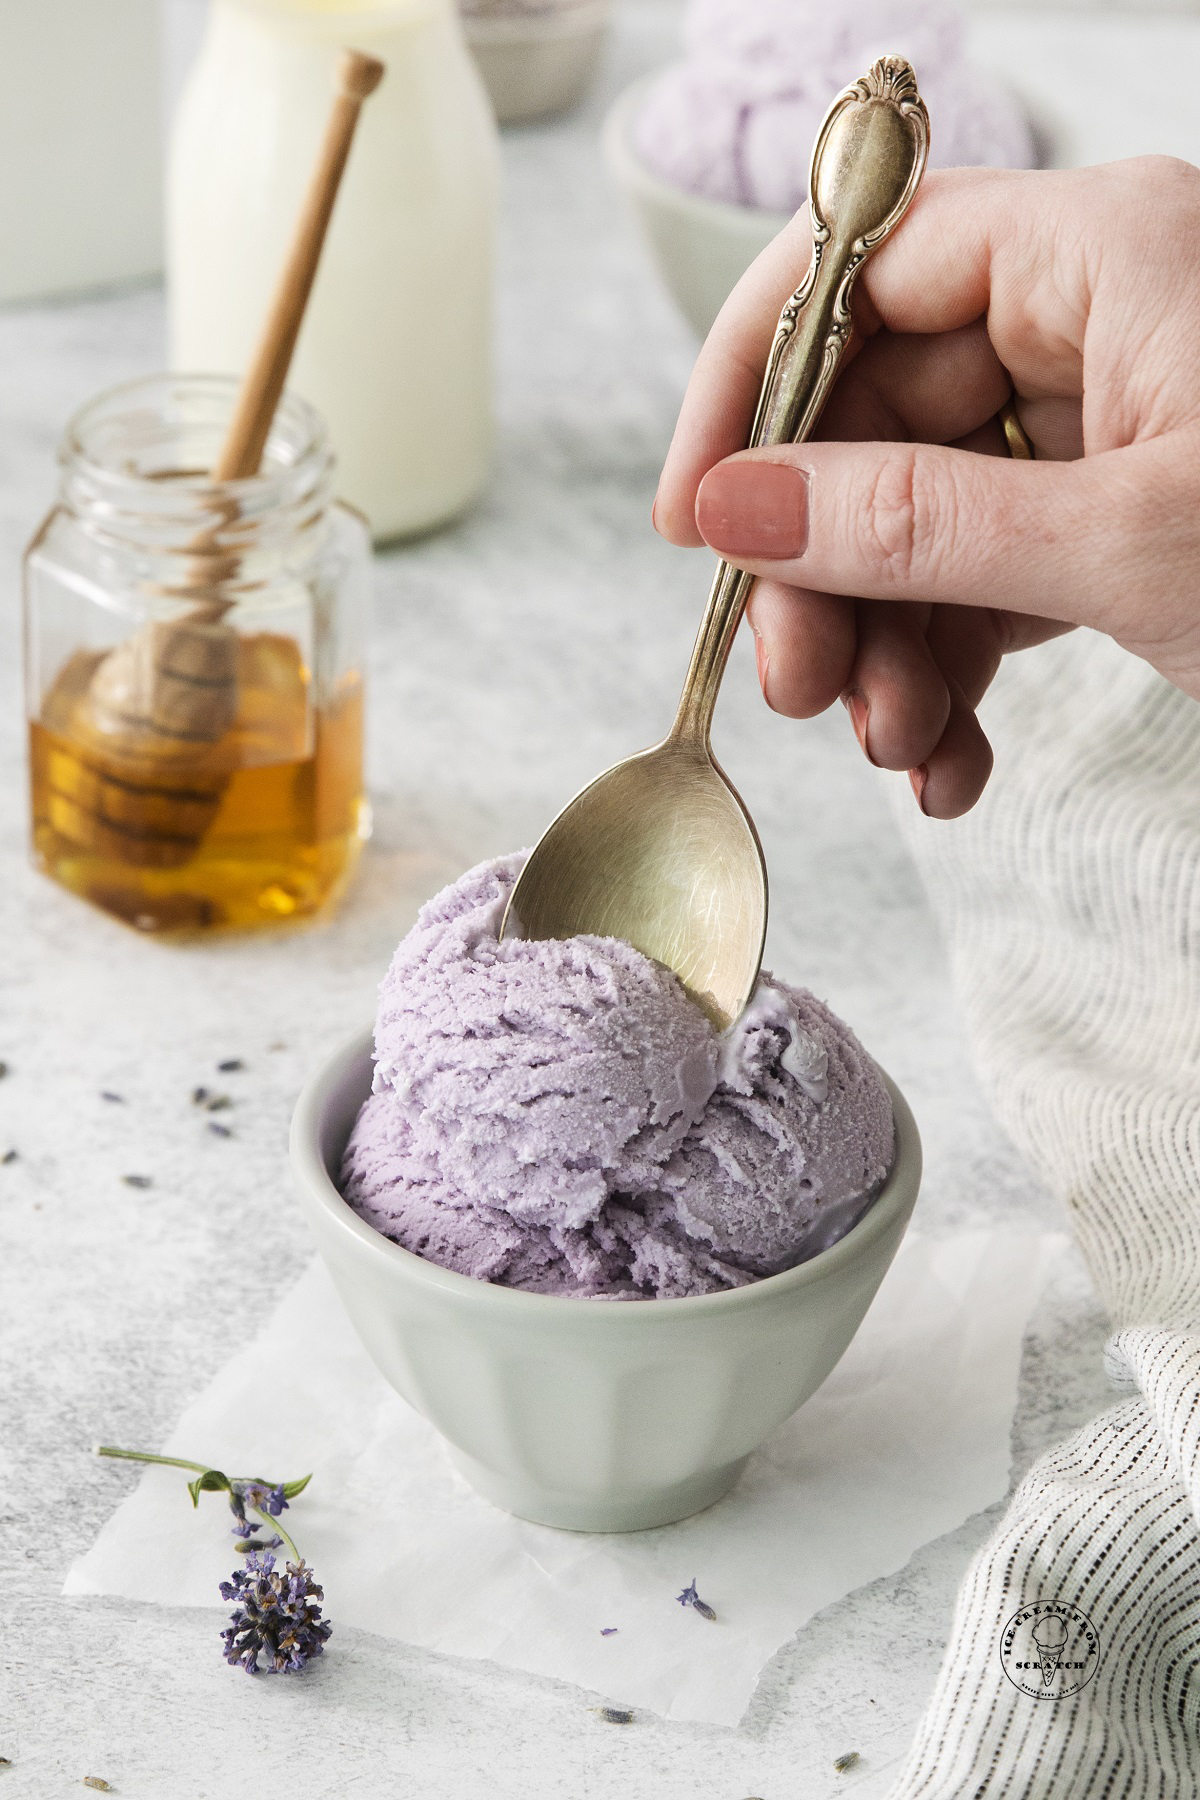 a bowl of lavender ice cream. A hand is eating it with a spoon. A jar of honey is in the background.